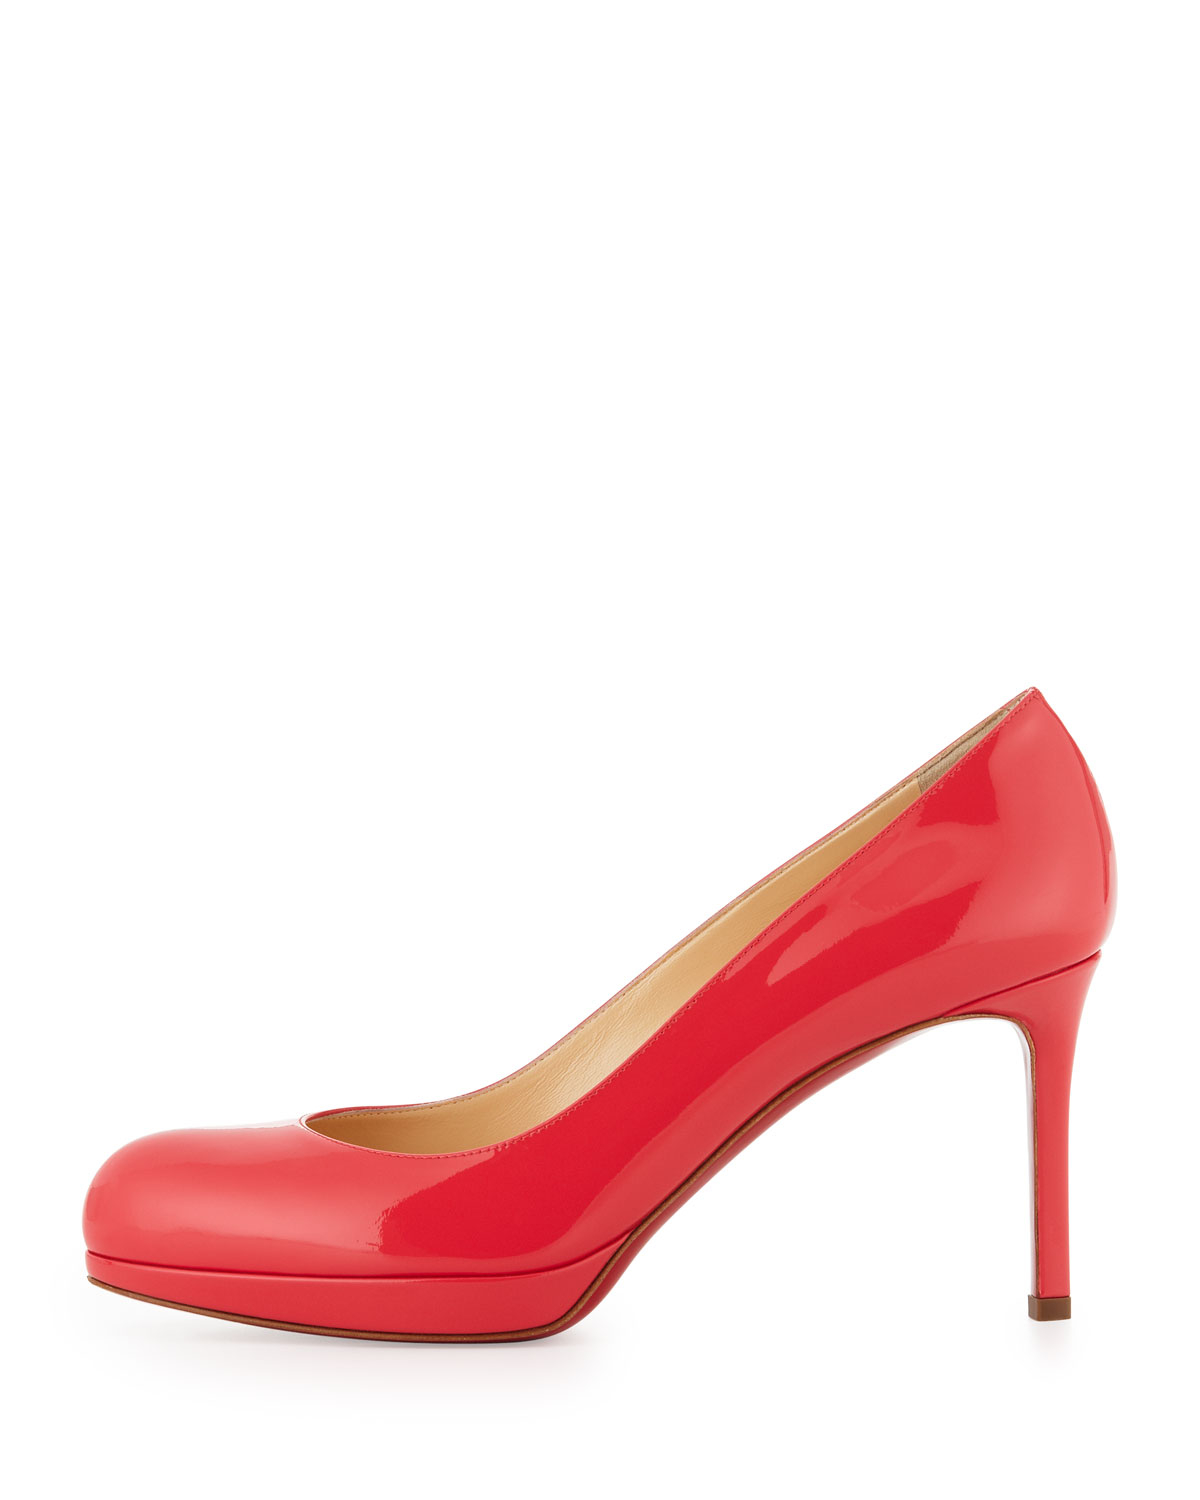 christian louboutin round-toe wedges Red patent leather covered ...